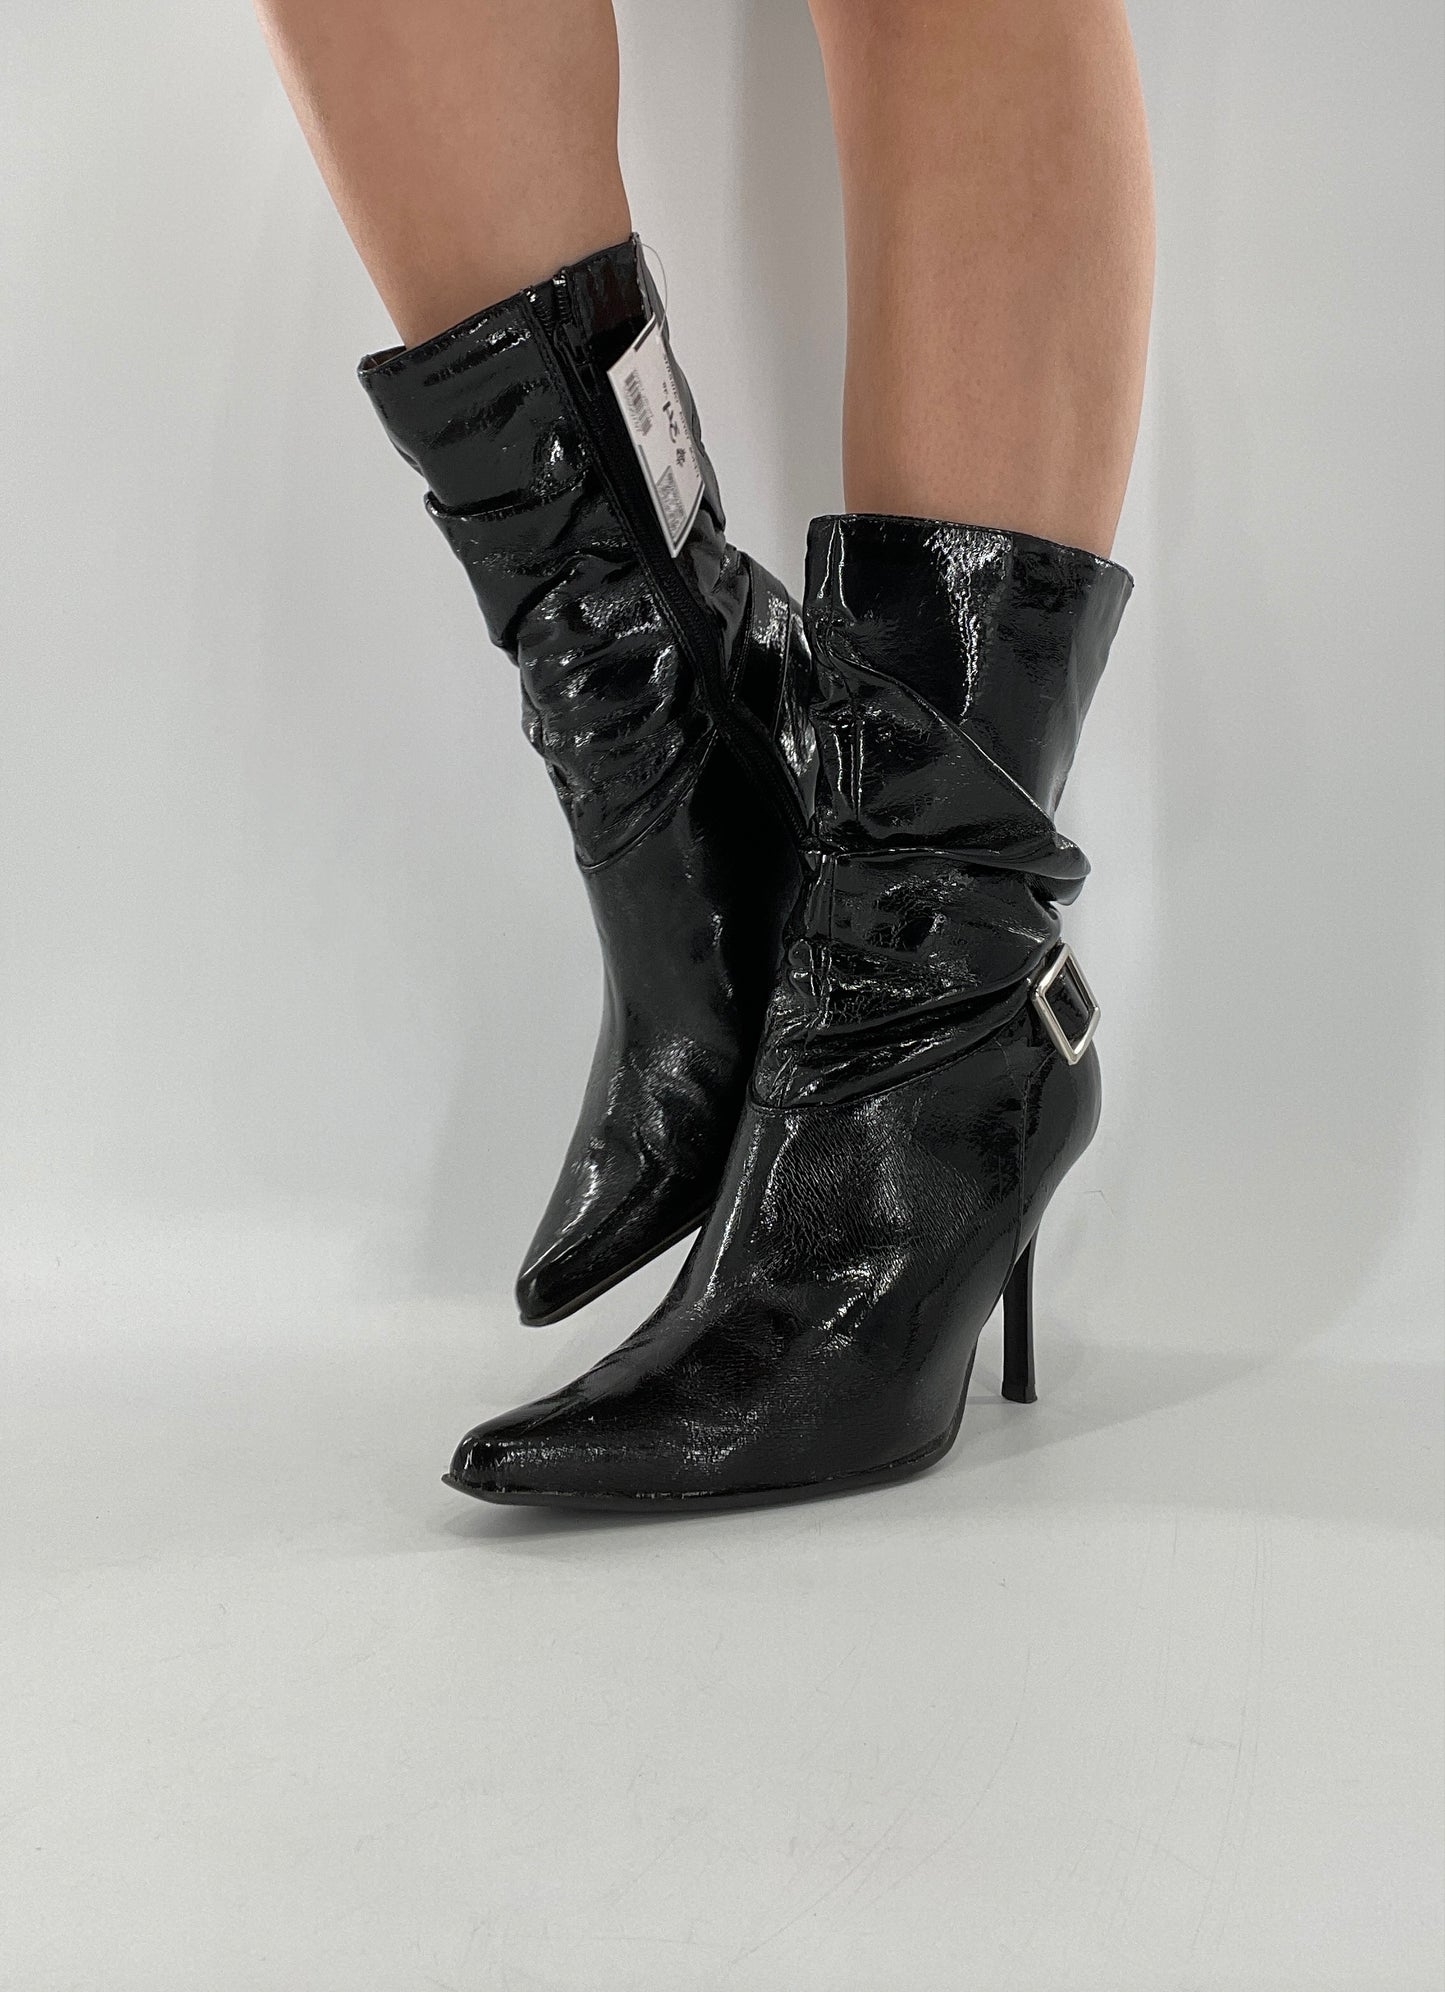 Vintage 1990s Torta Caliente Stacked Patent Booties (8W)